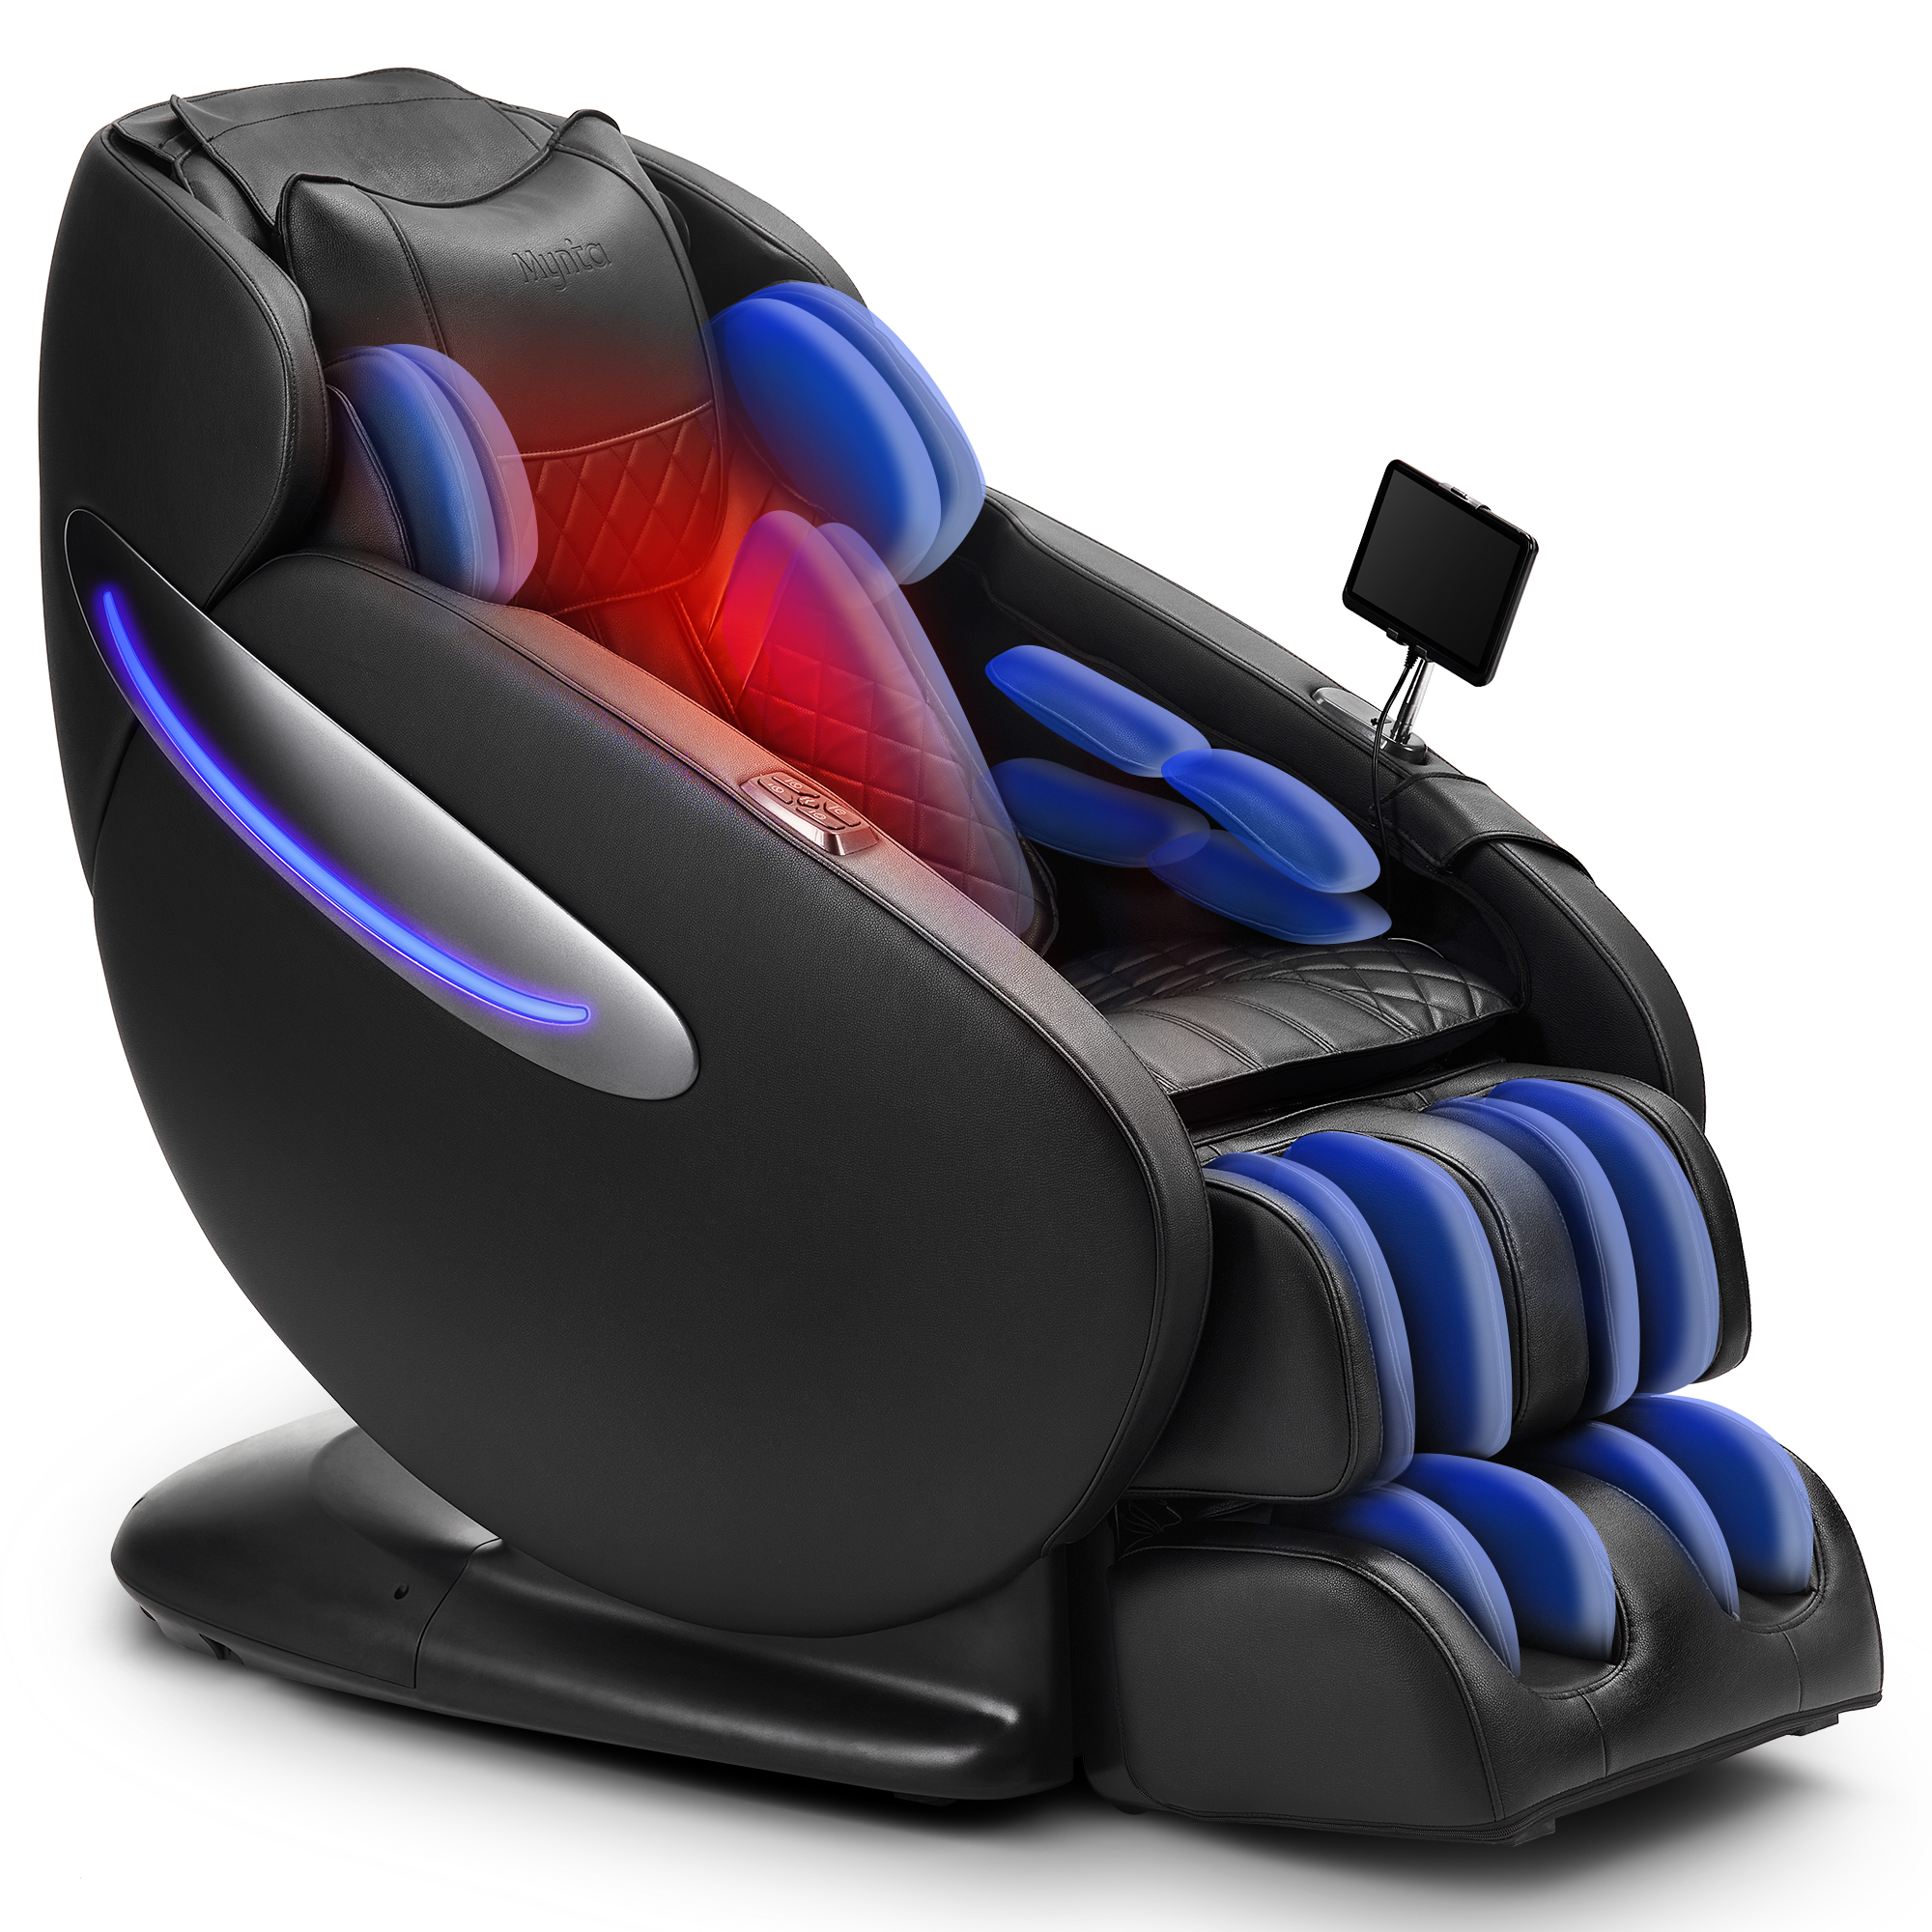 Mynta Massage Chair, Full Body Zero Gravity Massage Chair, SL Track Massage Chair Recliner with AI Voice Control, LCD Screen, Quick Access Buttons, USB Charger, Bluetooth, Foot Rollers, Heating, Black